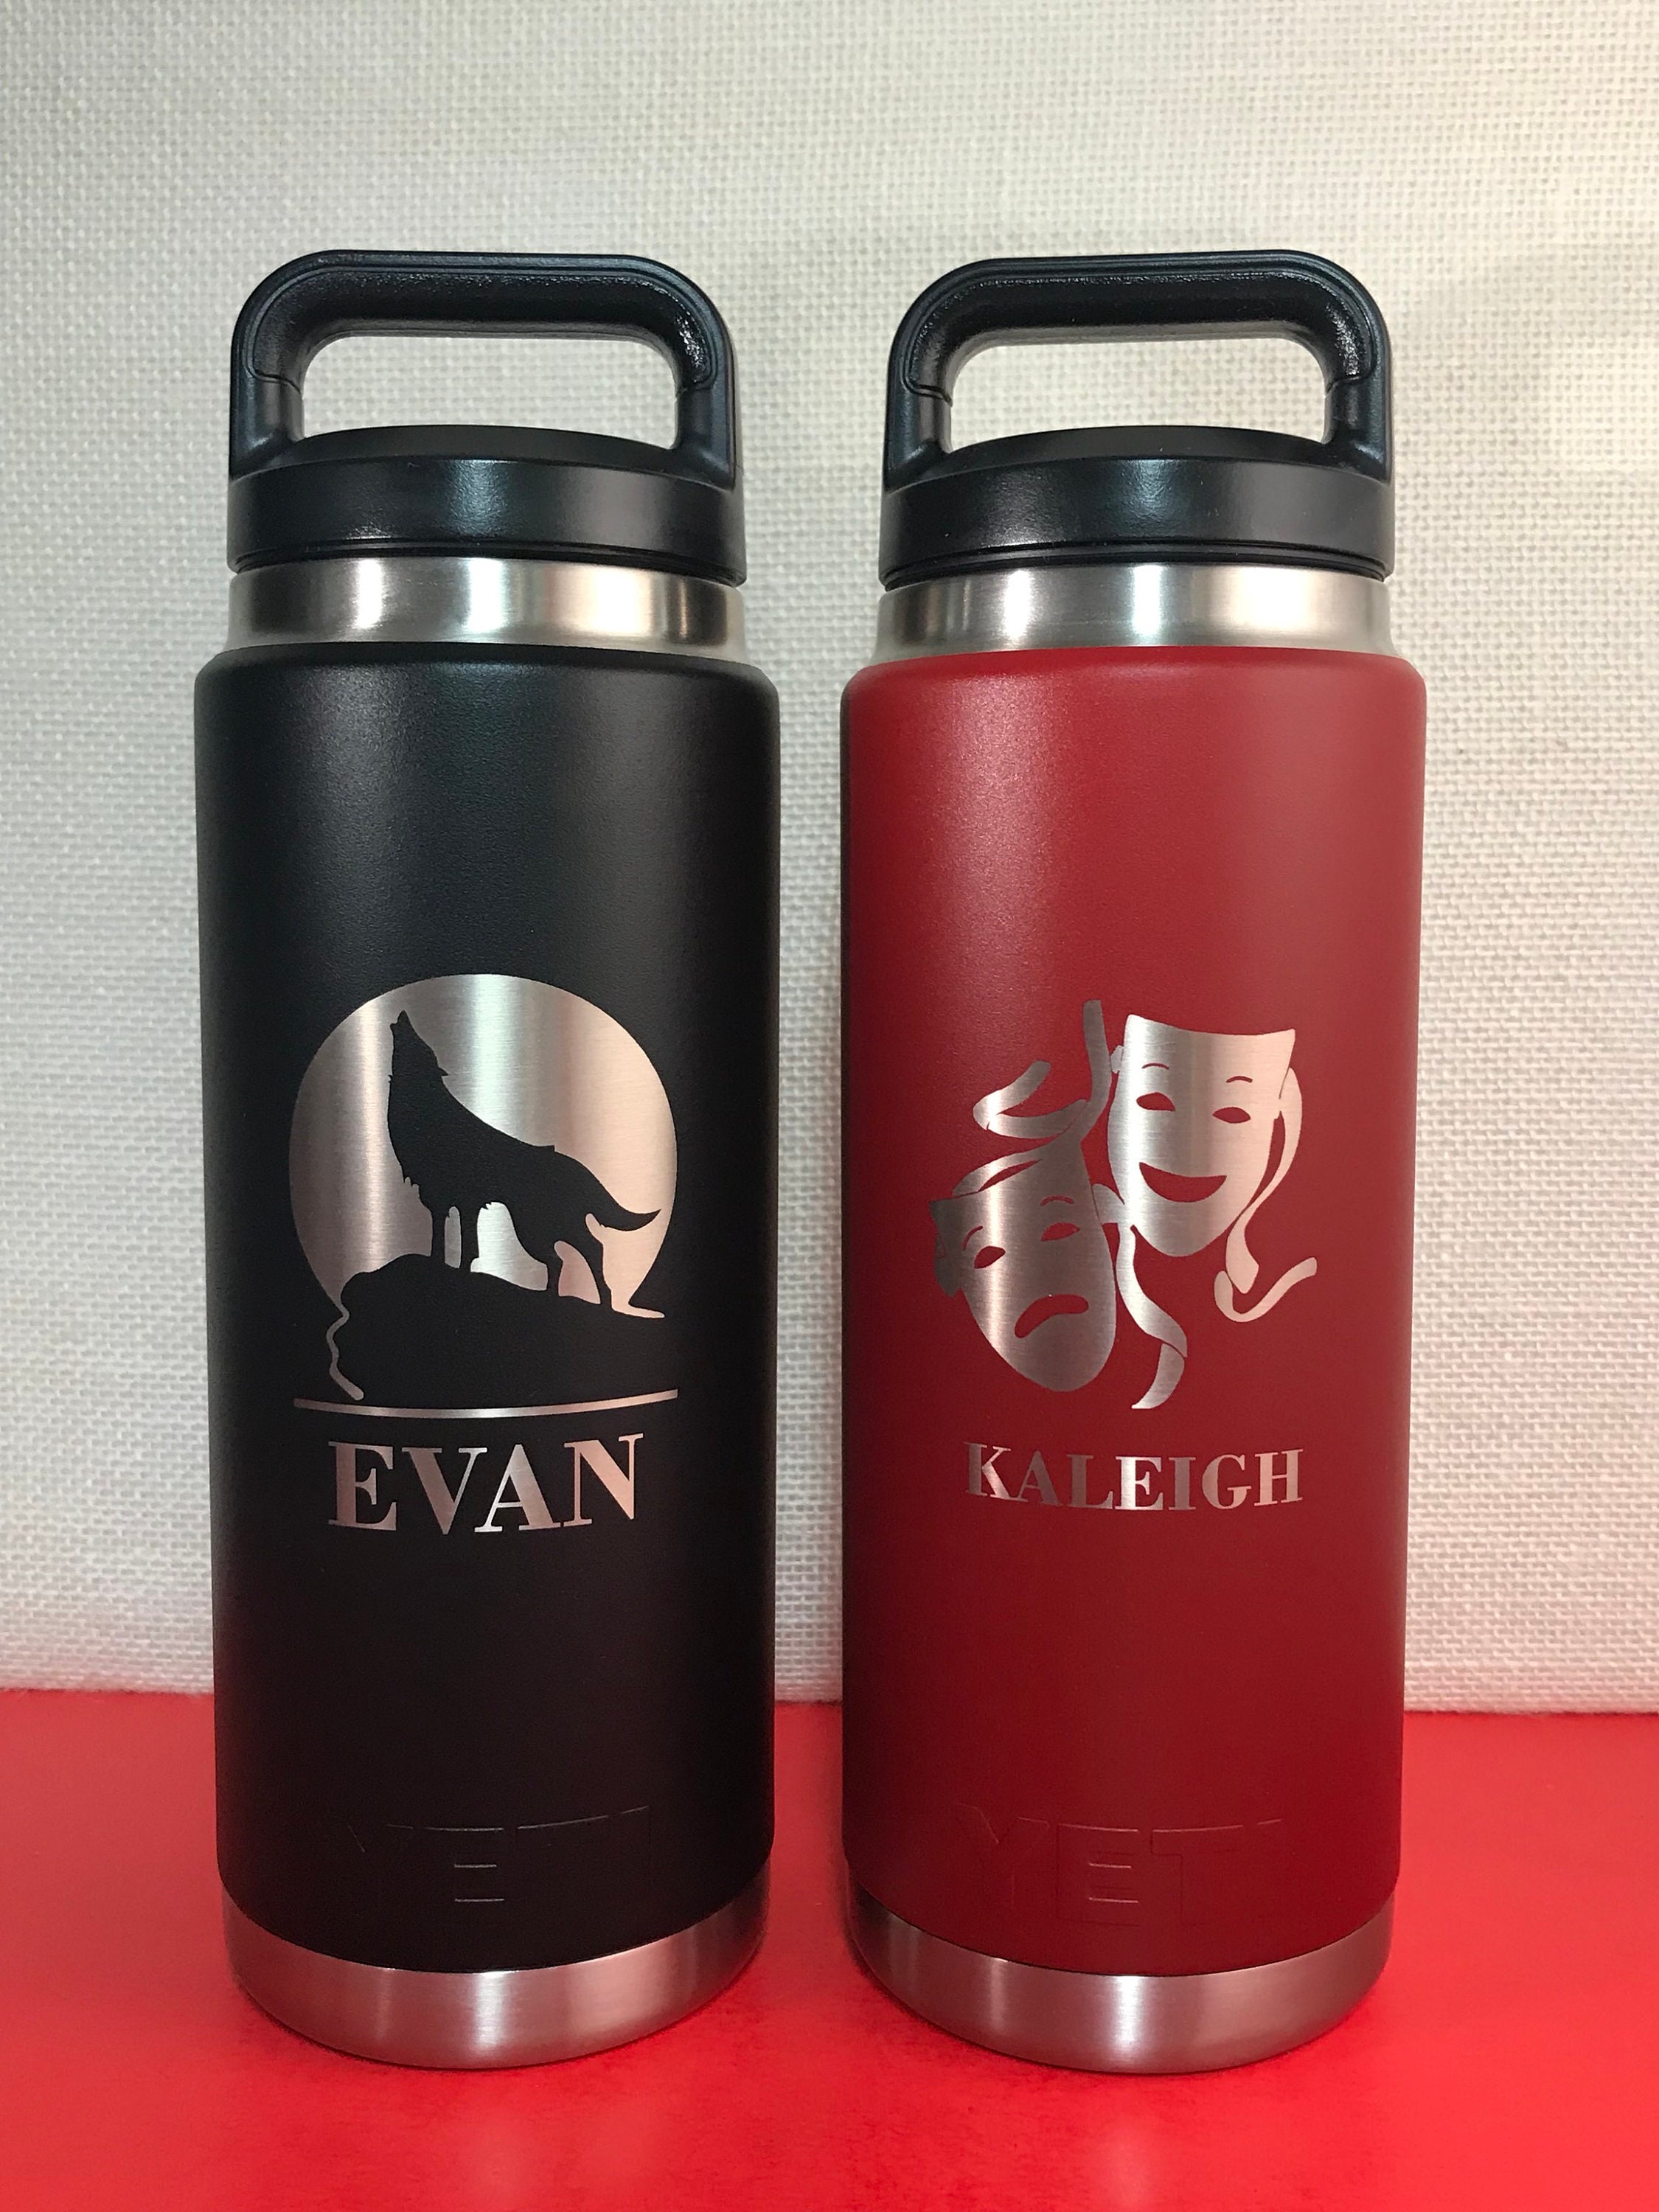 YETI RAMBLER 36OZ BOTTLE WITH CHUG CAP LIMITED EDITION RESCUE RED